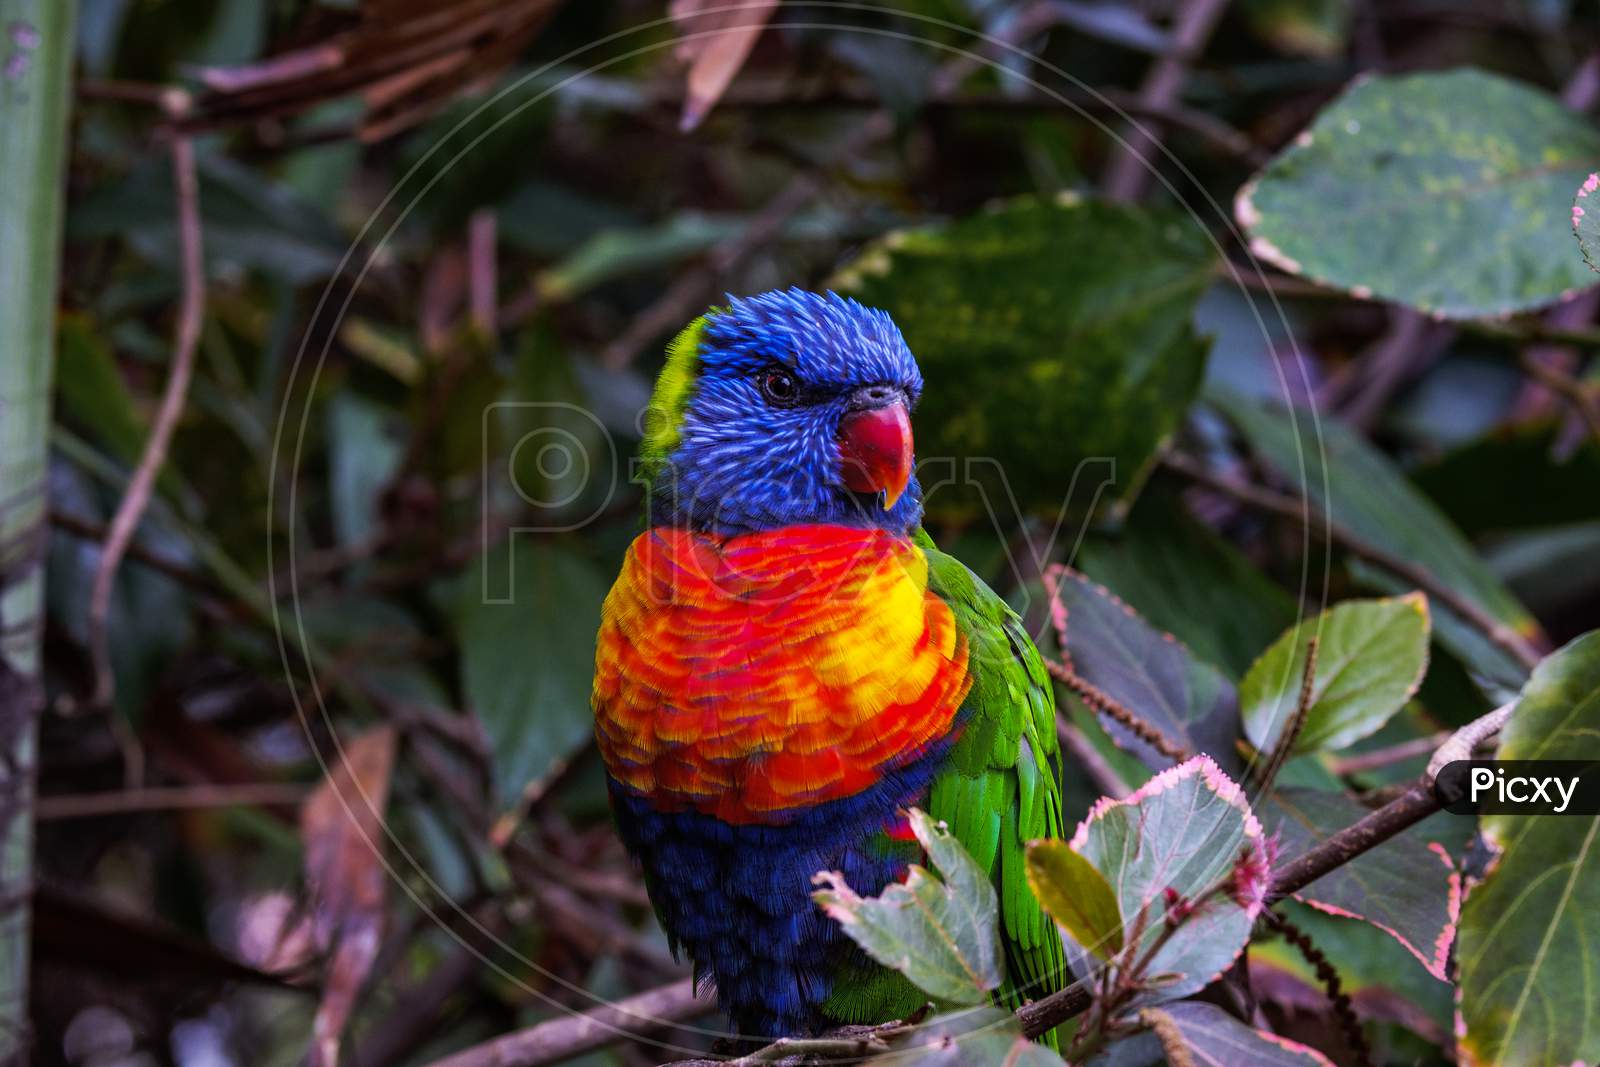 Mesmerizing Shot Of A Colorful Parrot On Blurred Background